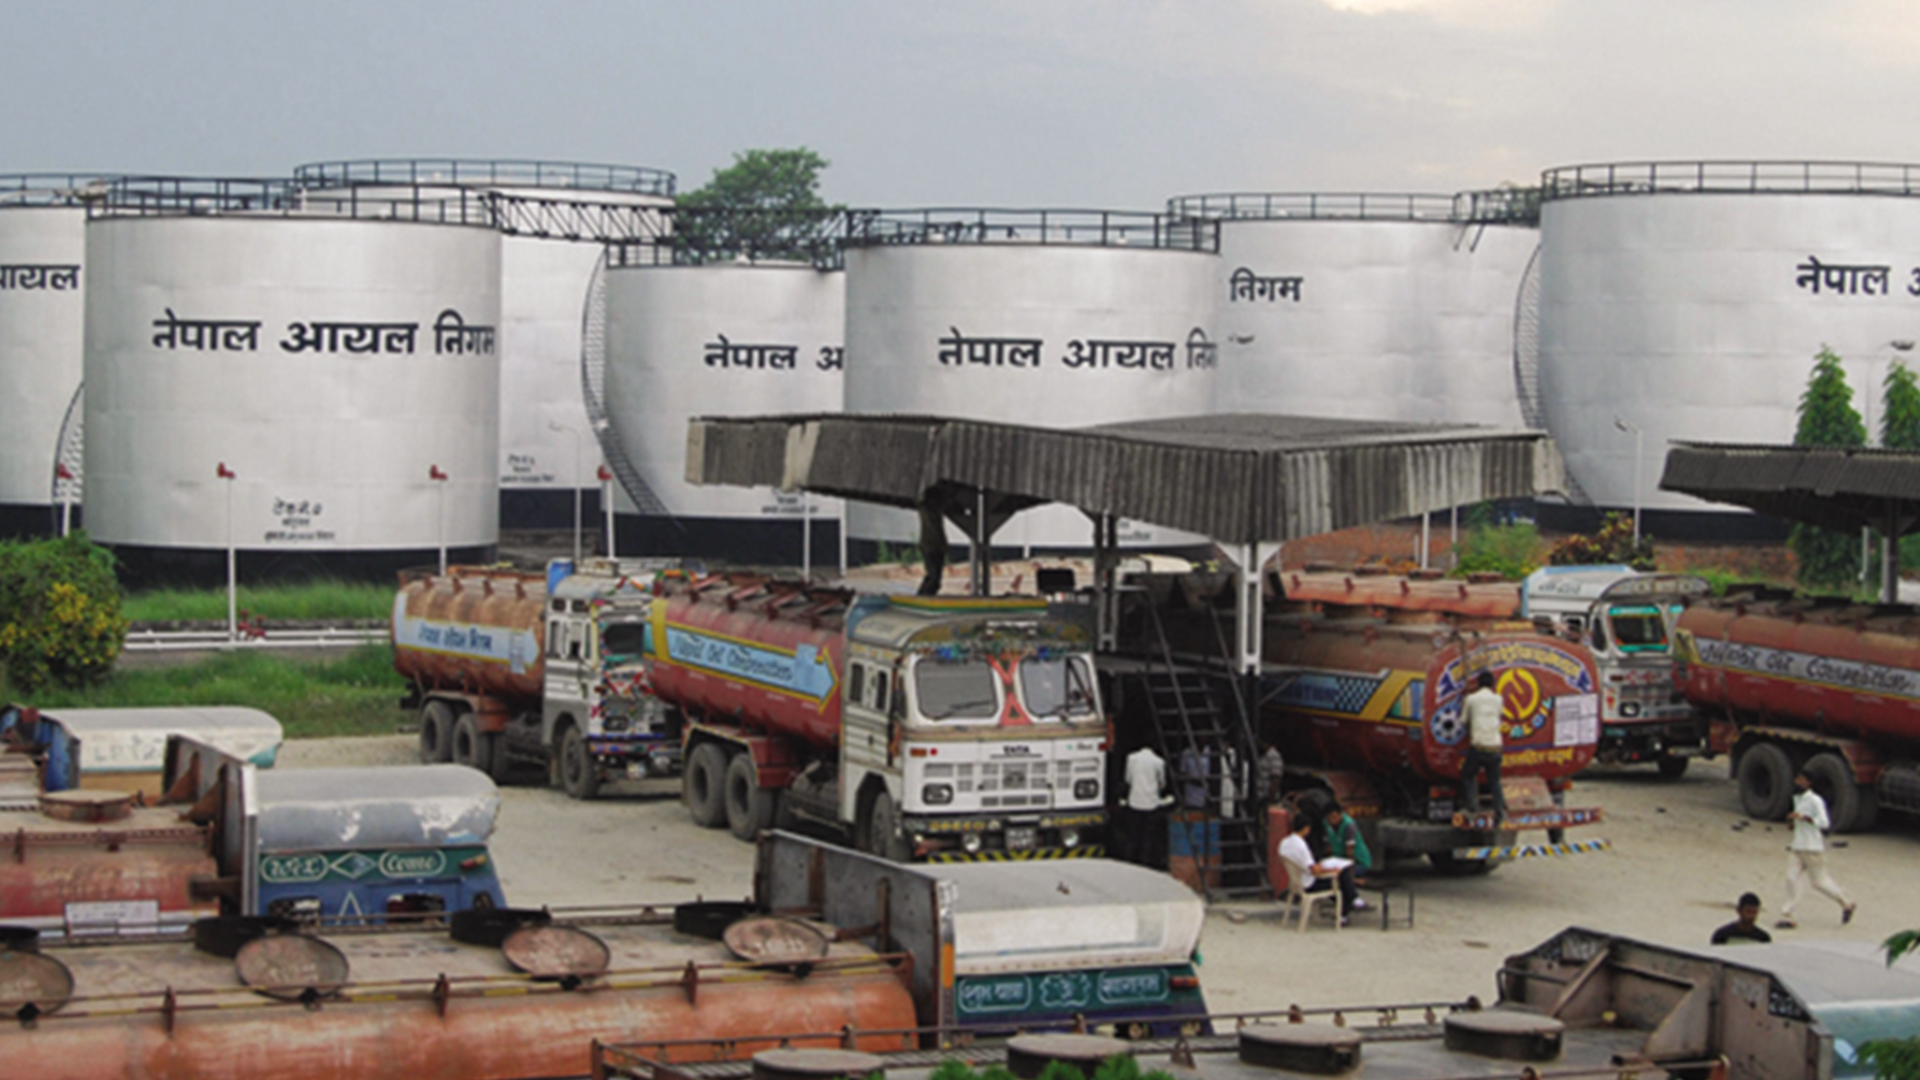 Automatic Electronic GPS system to be Used by Nepal Oil Corporation to track Tankers